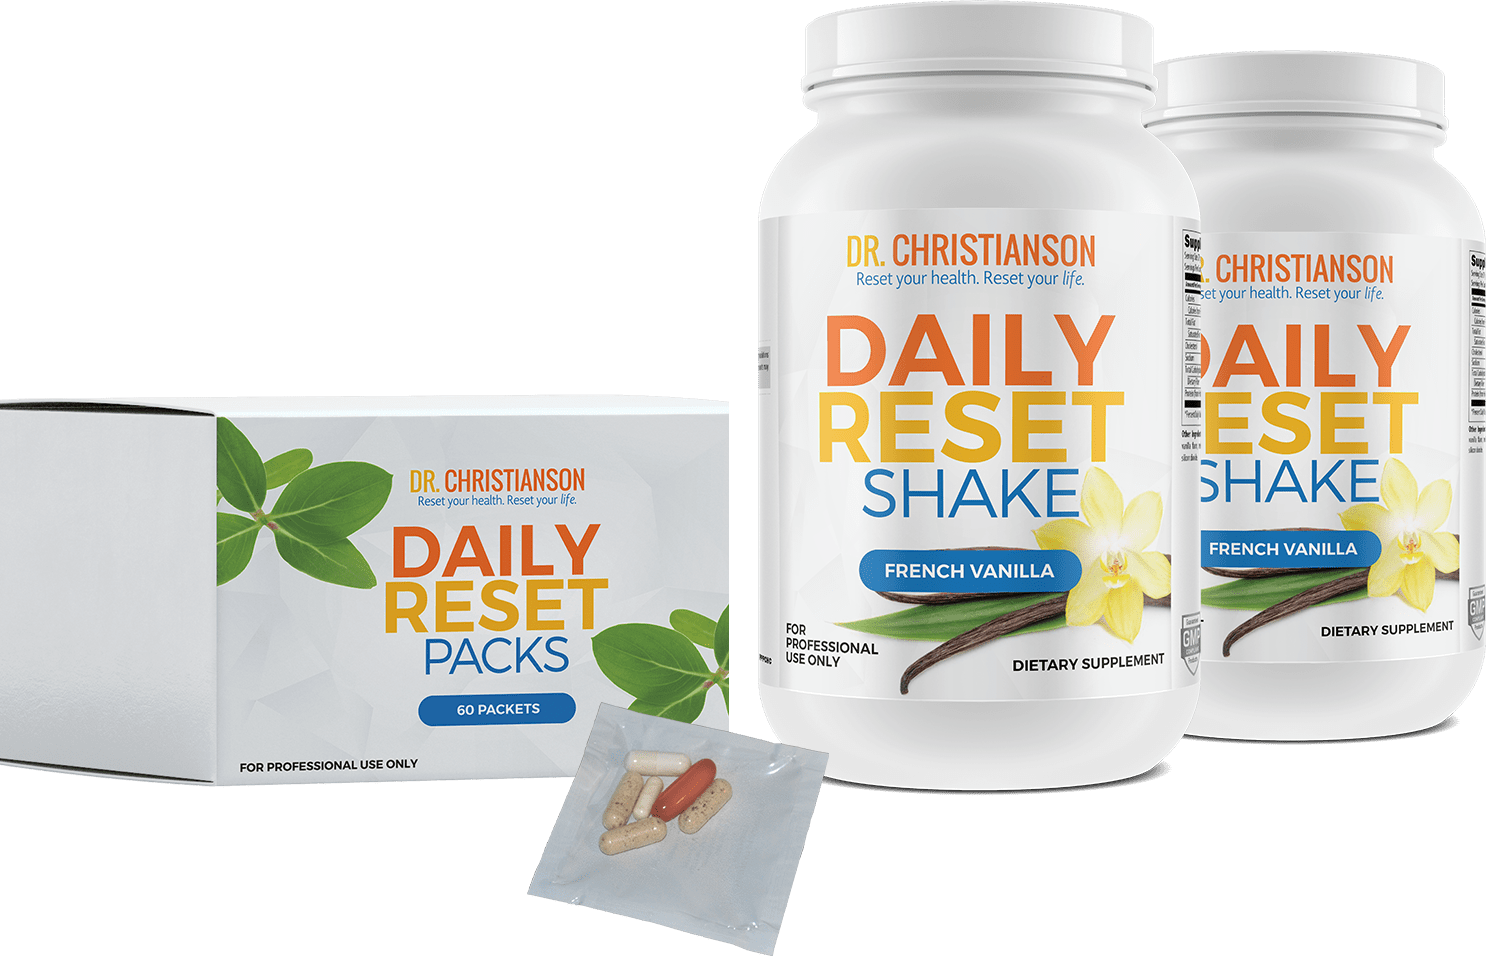 Weight Loss In A Box - Chocolate Daily Reset Shakes are out of stock